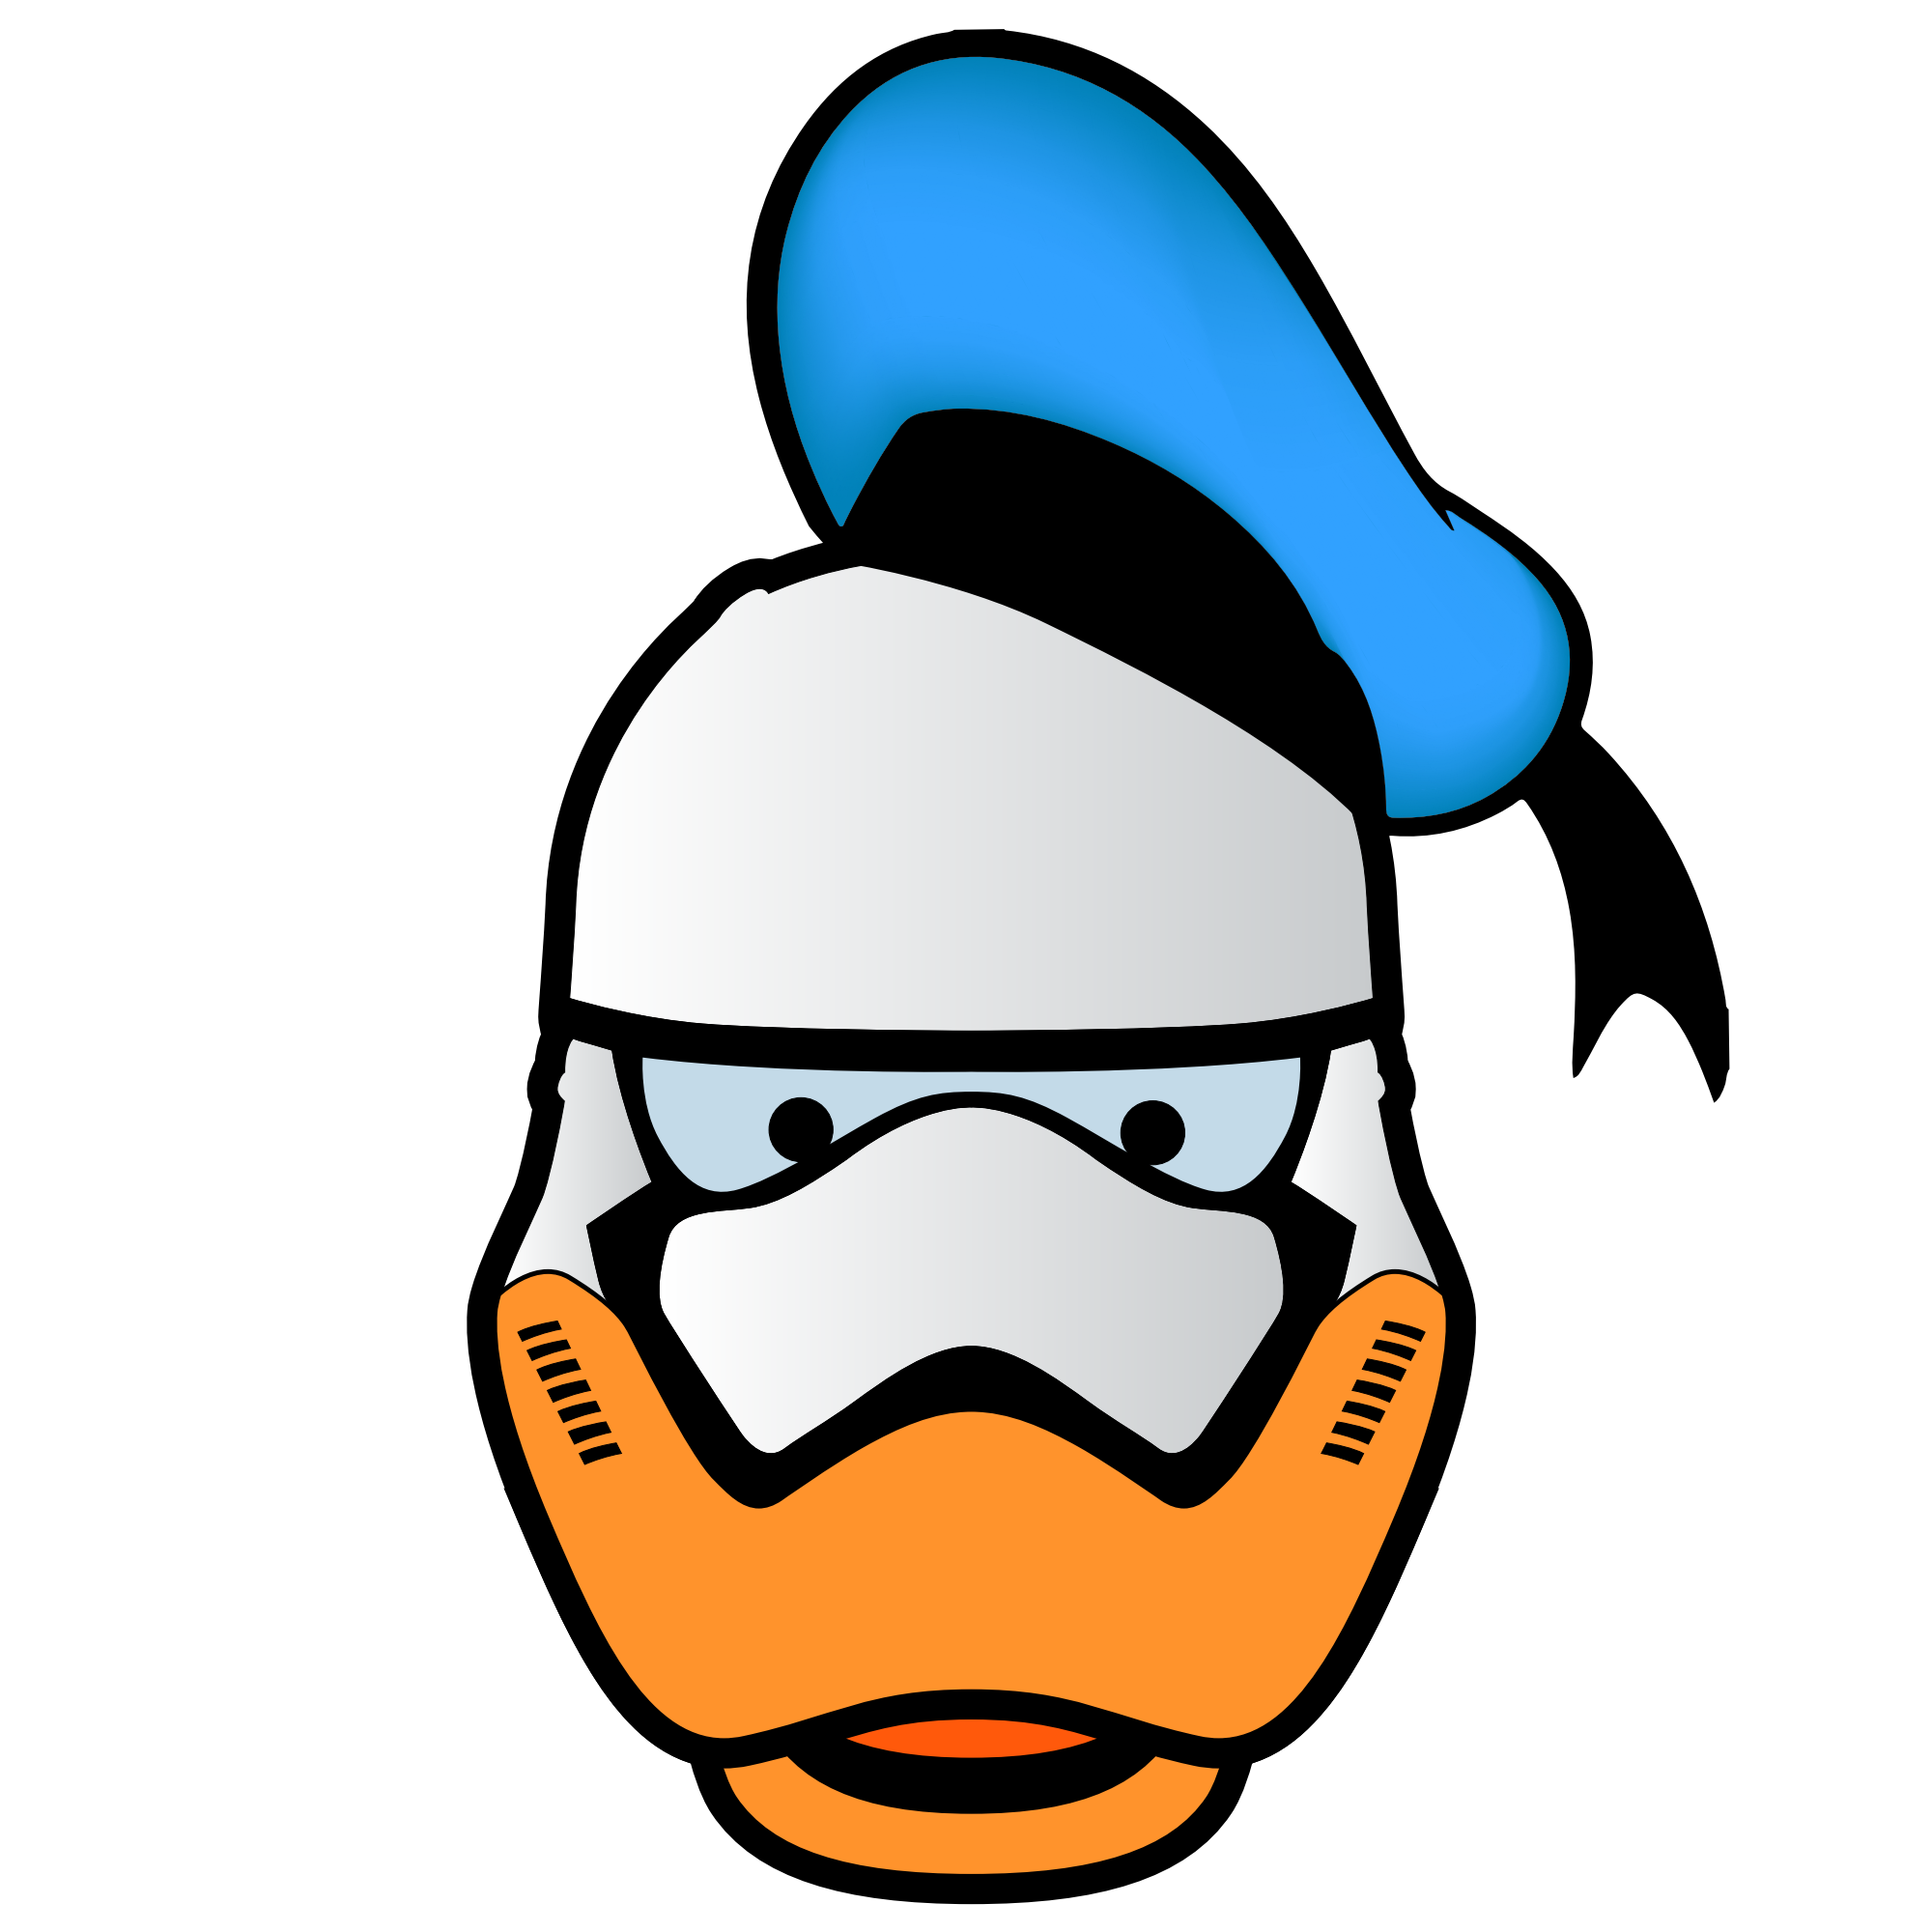 Free picture: famous cartoon character, computer graphic, vector, duck, face